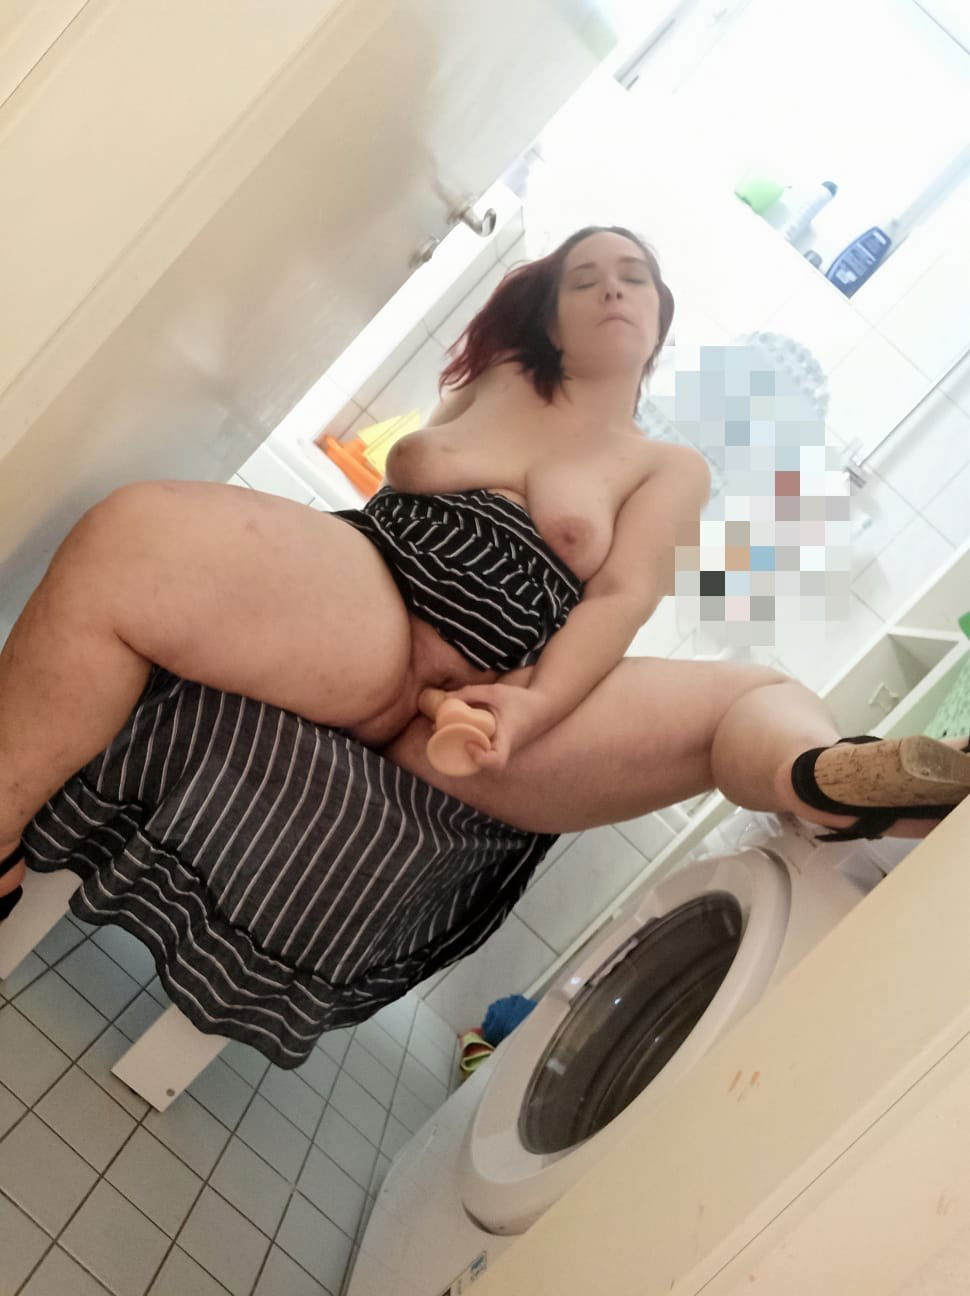 Watch the Photo by SubWife85 with the username @SubWife85, who is a verified user, posted on November 3, 2020 and the text says 'I'm a nasty little marriage pussy'